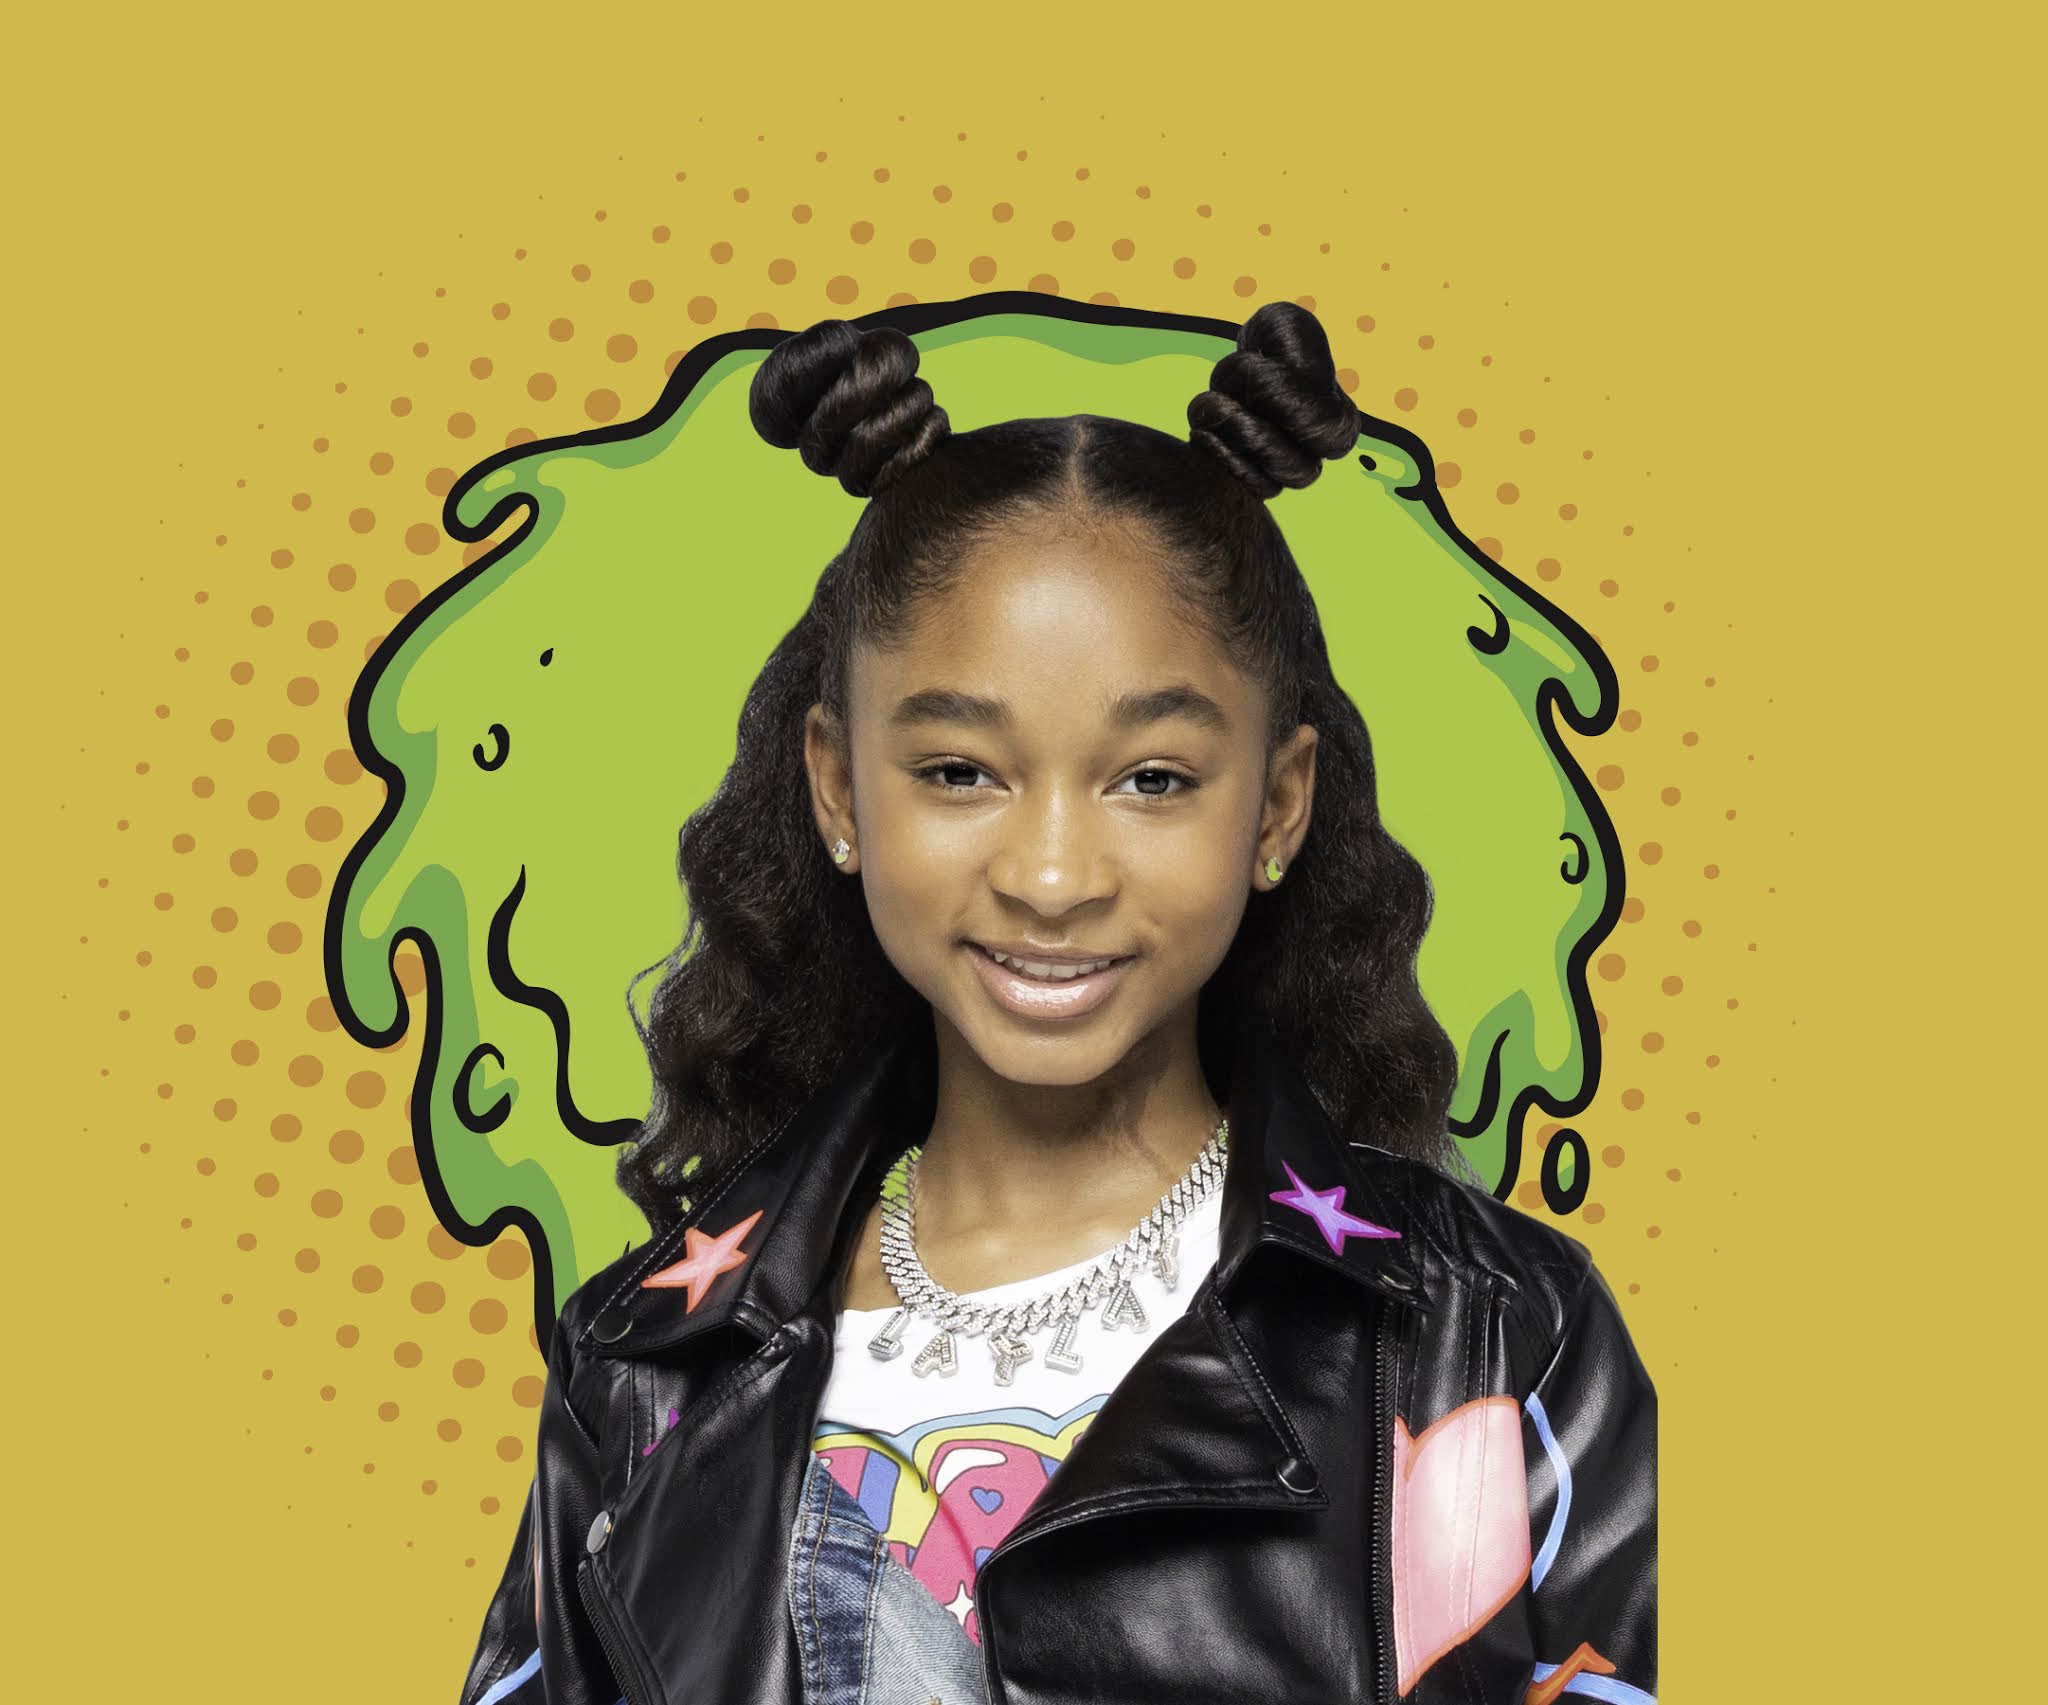 NickALive!: Nickelodeon Greenlights All New Comedy Series Starring Alaya “That Girl Lay Lay” High